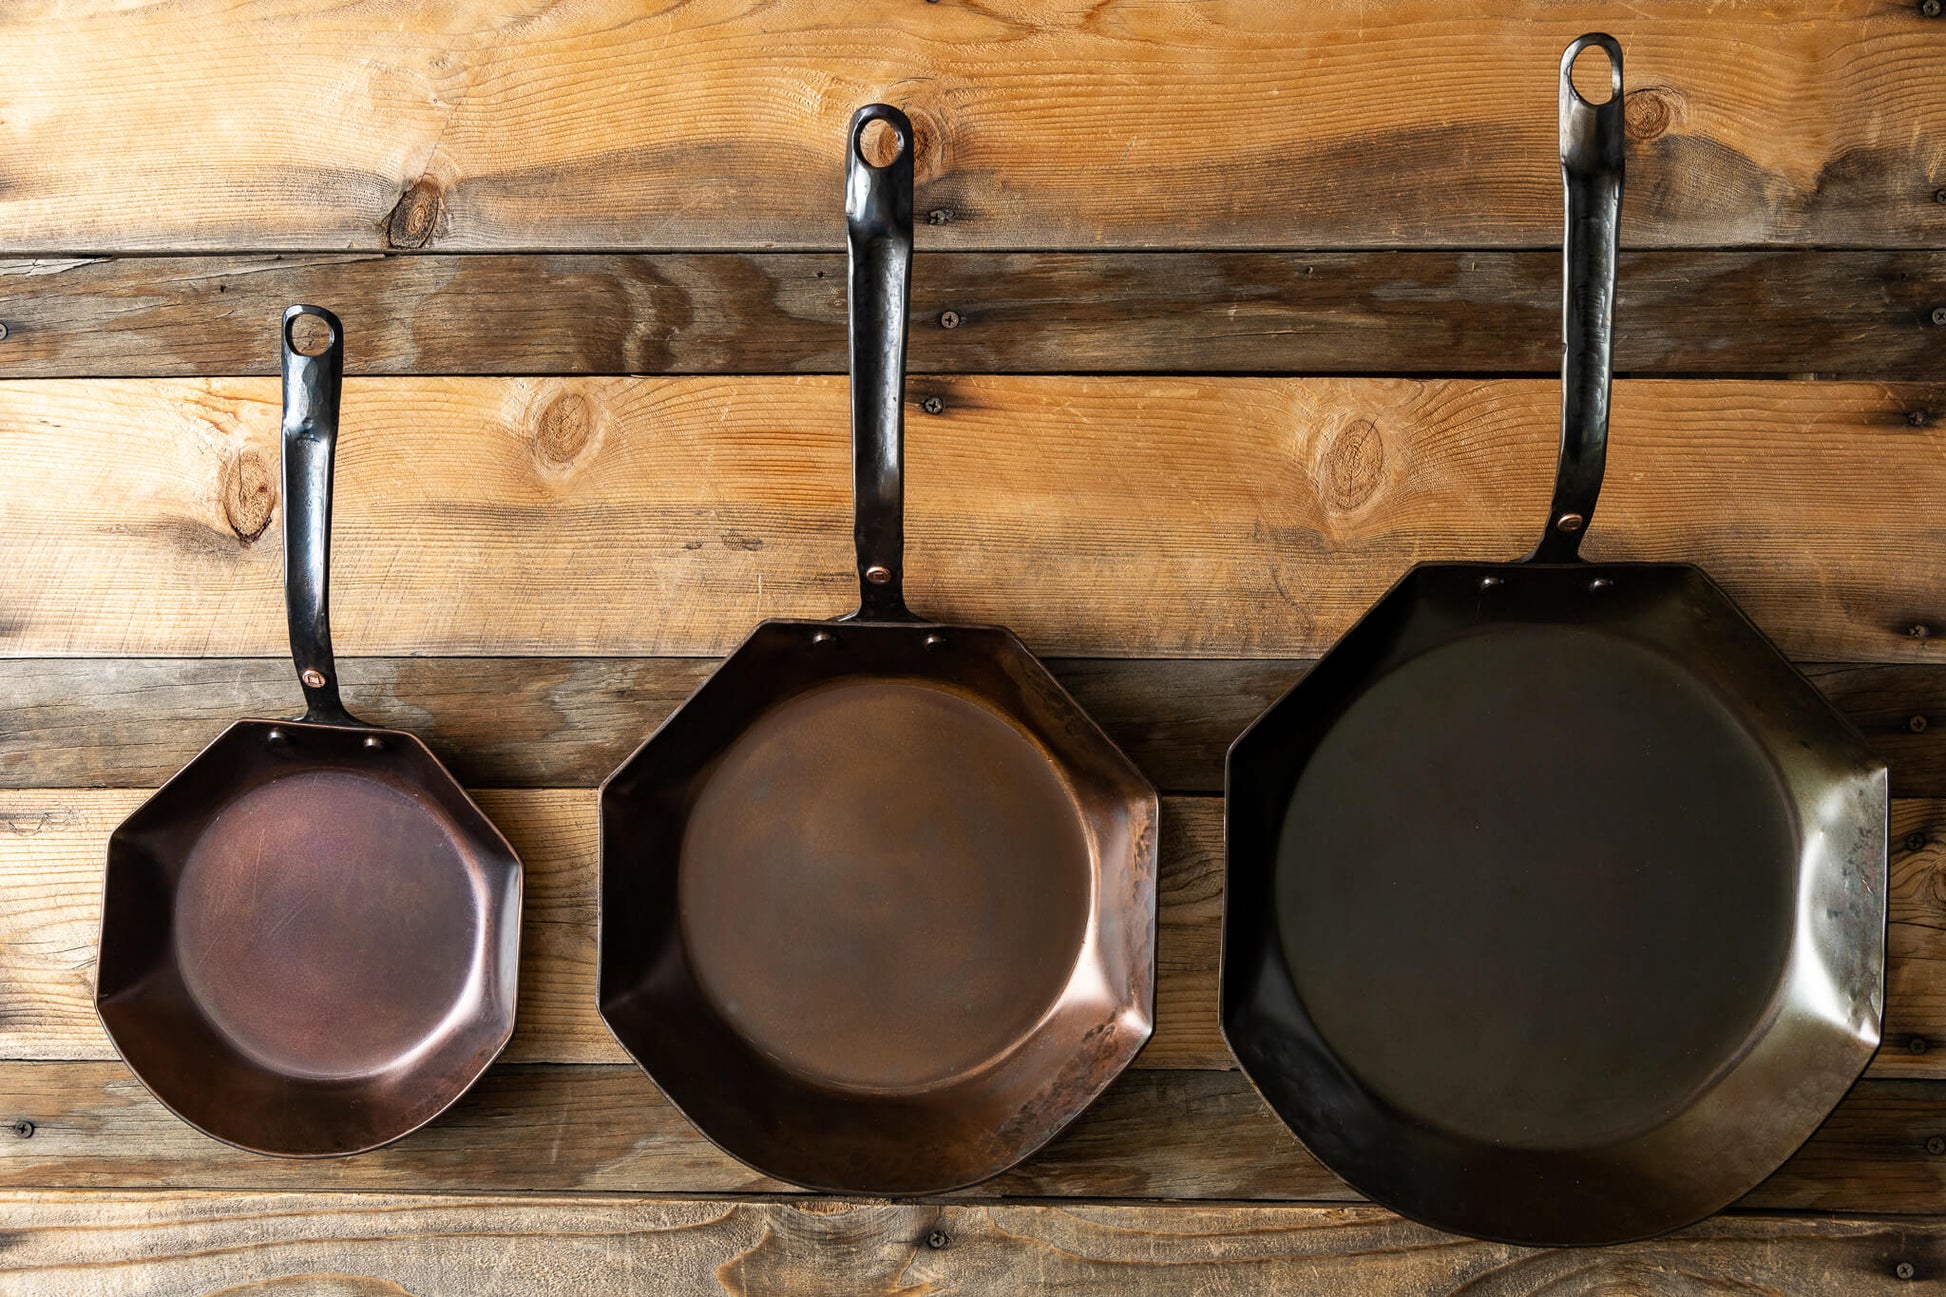 10 Hybrid Carbon Steel Skillet - Hand Forged – Copper State Forge